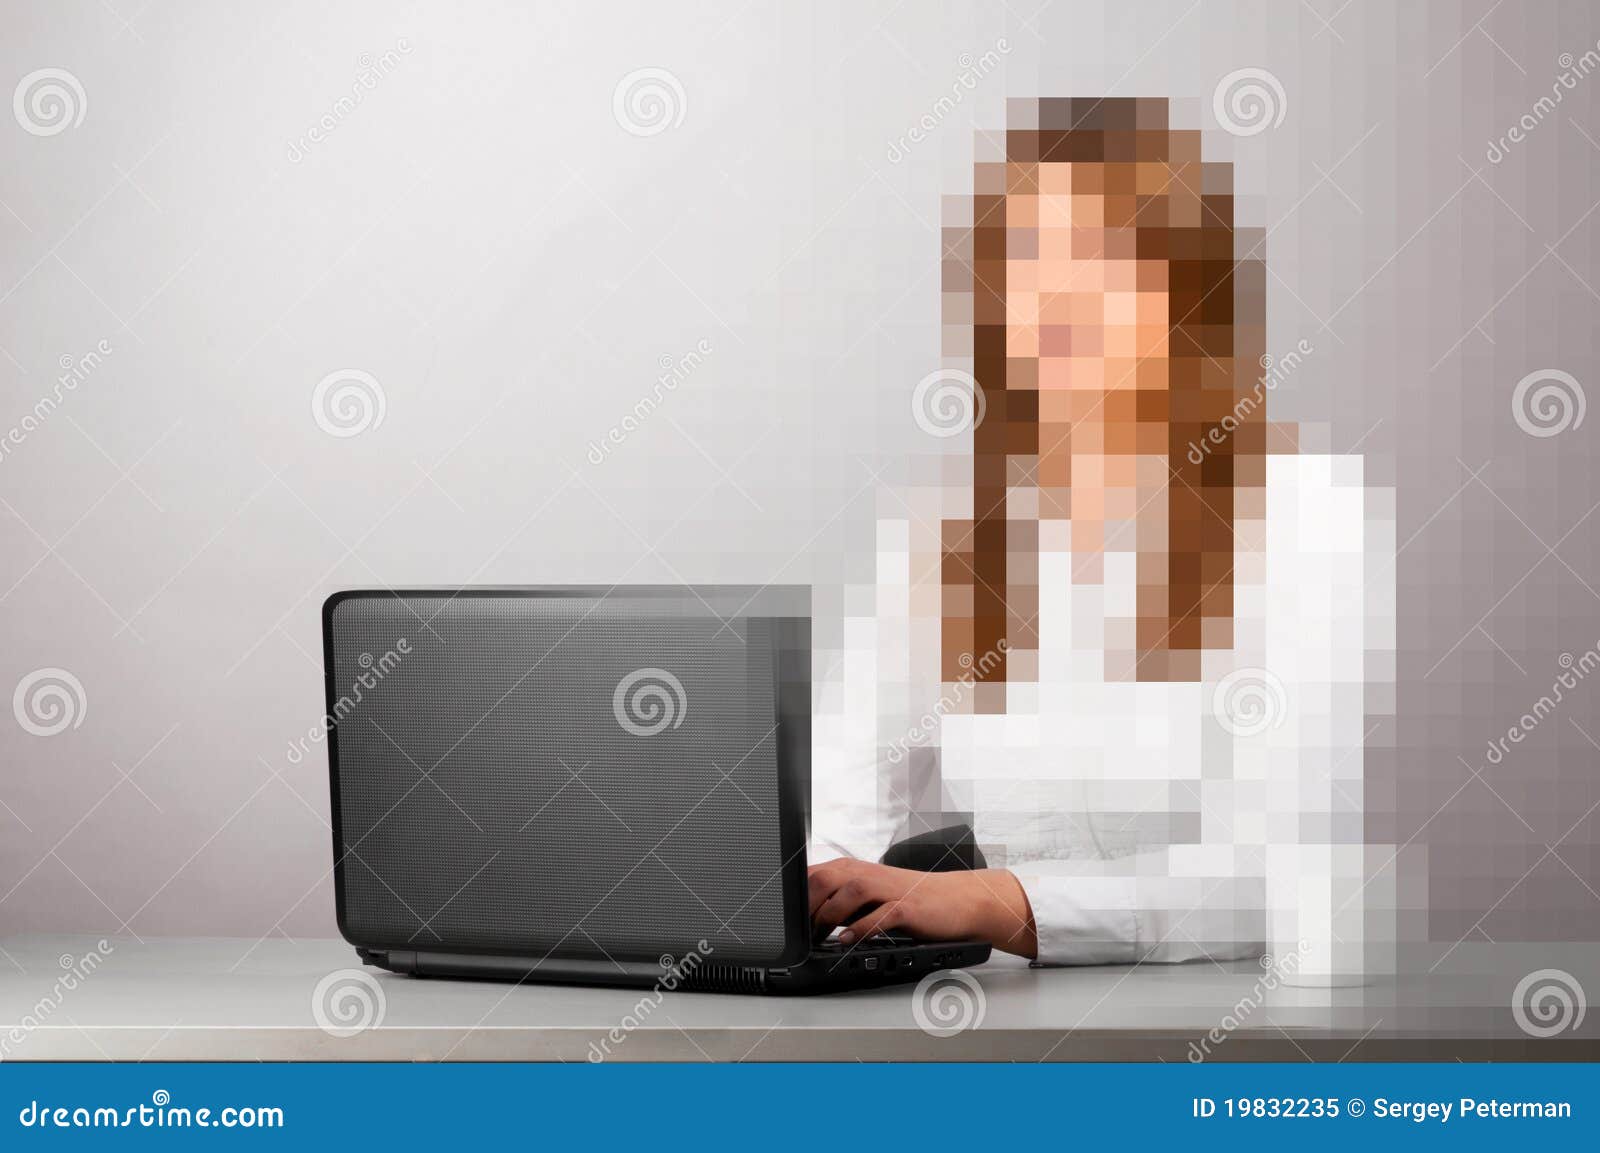 pixelated business woman